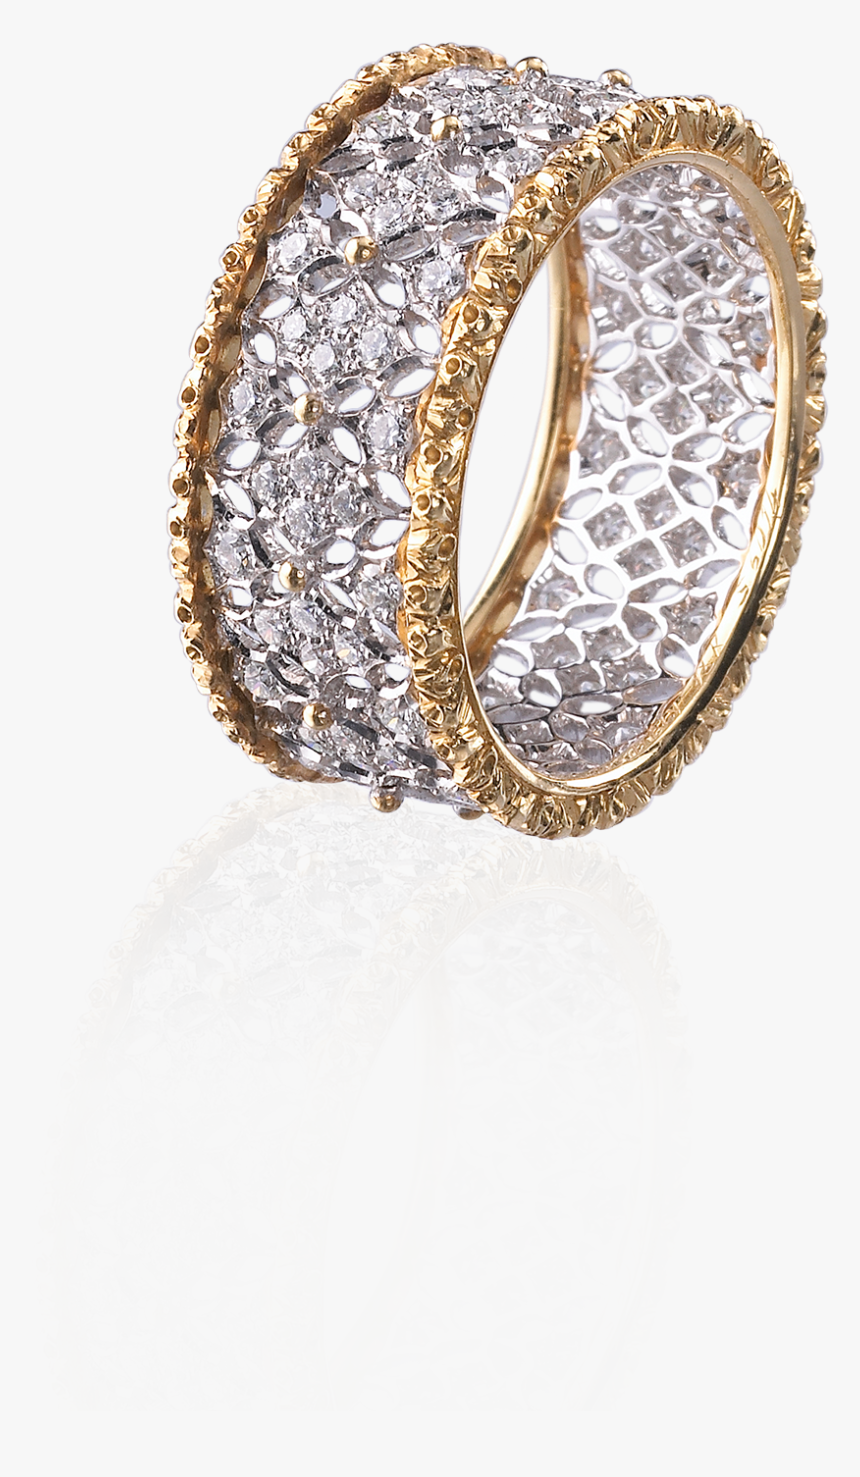 Buccellati - Rings - Vietri - Jewelry - Engagement Ring, HD Png Download, Free Download